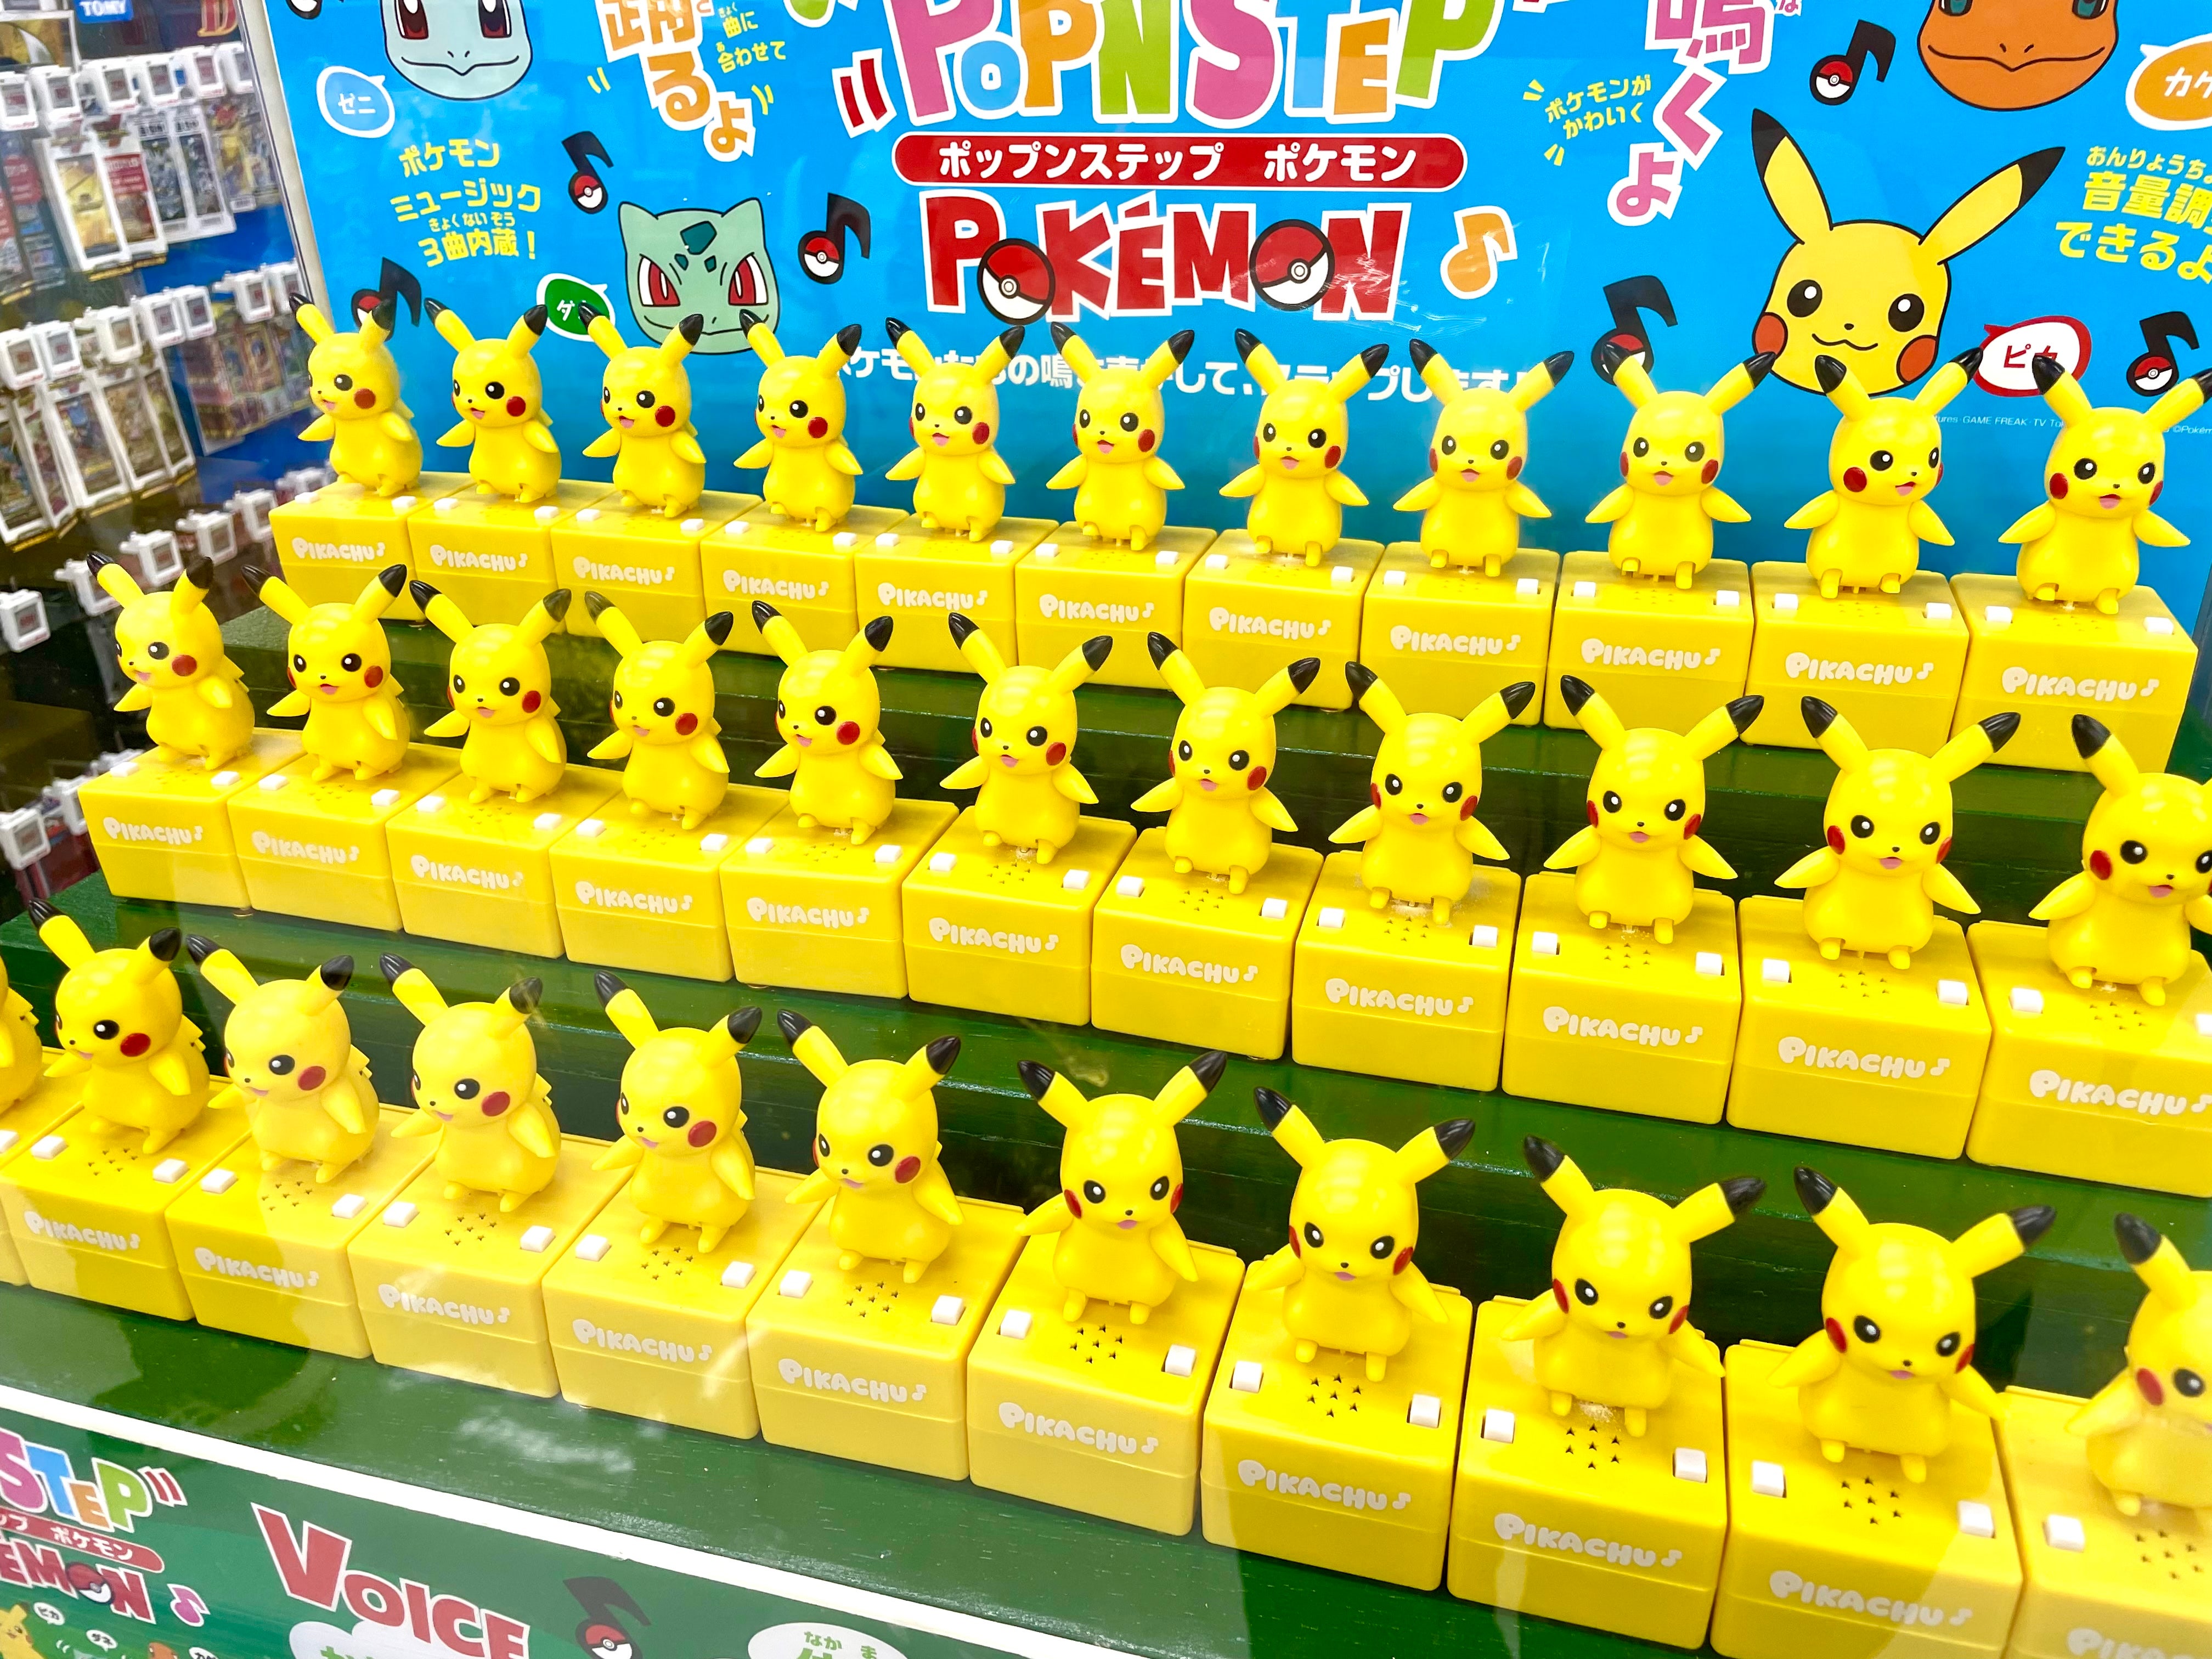 Lots of pikachu figurines in a display case together